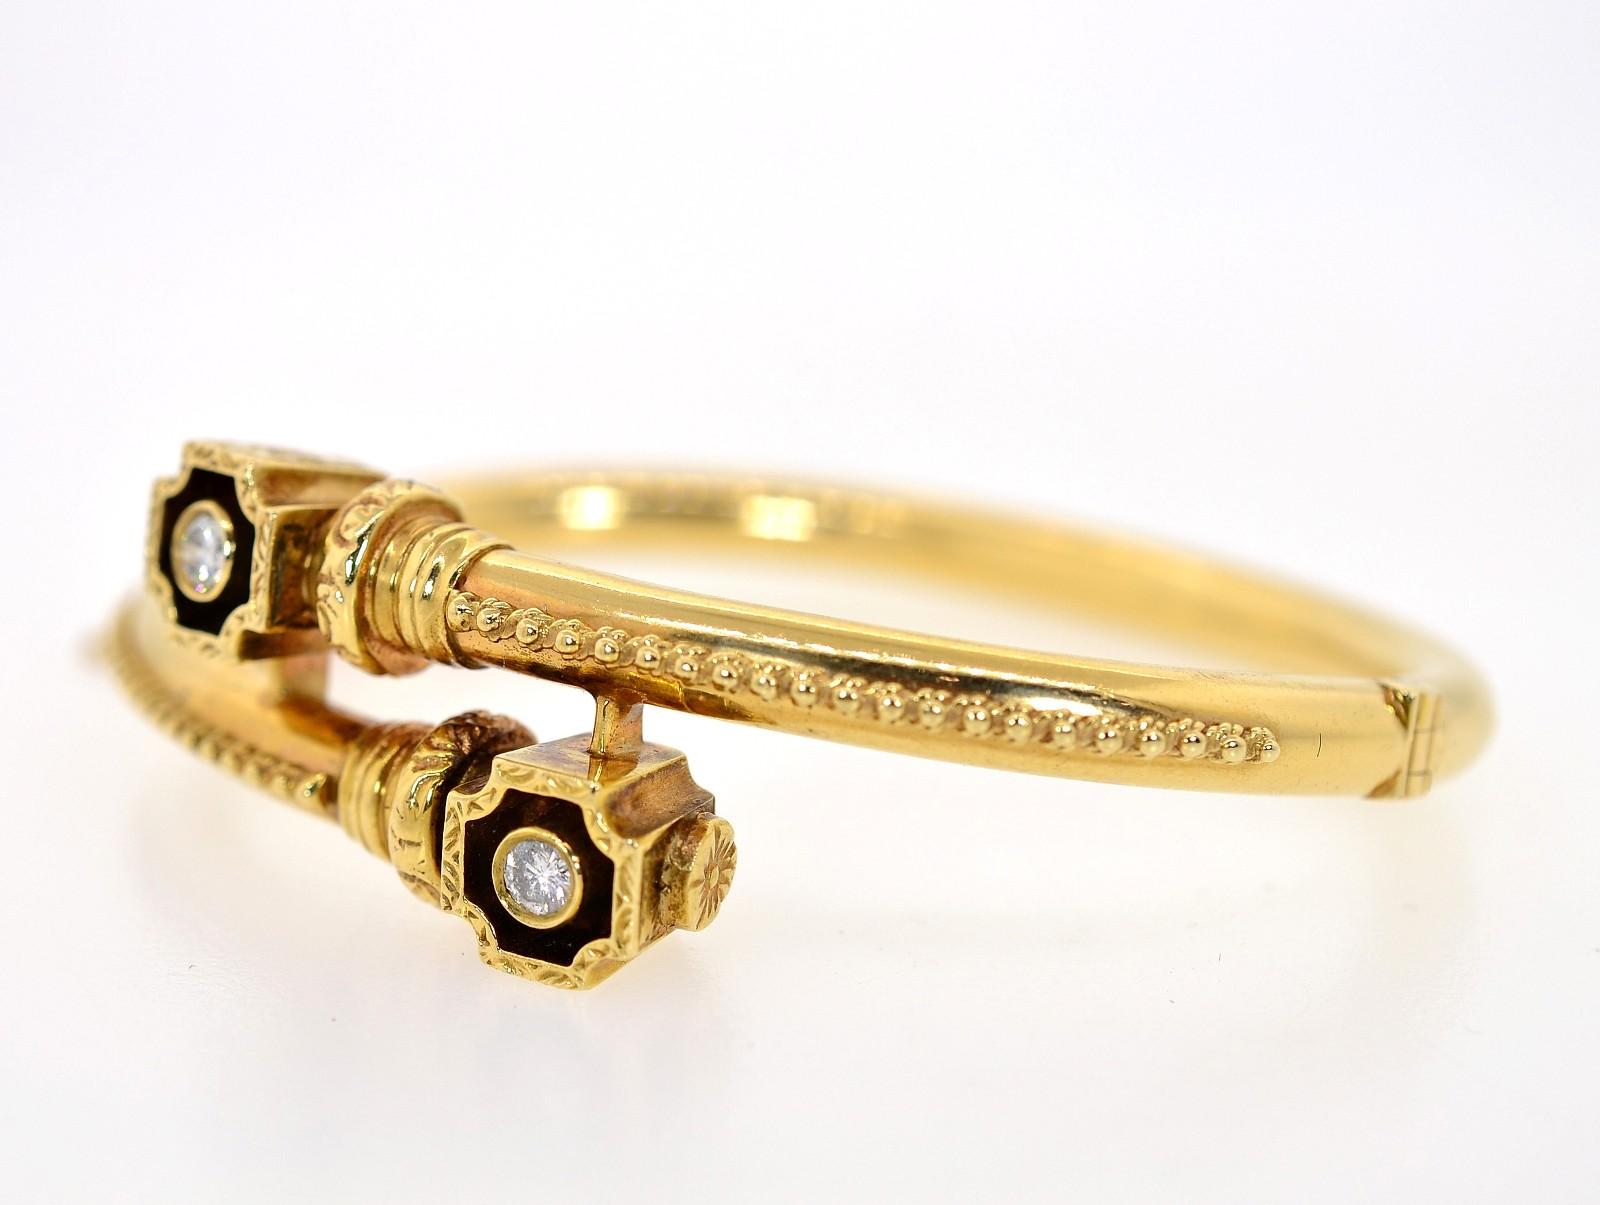 Created of 14KT yellow gold in the 1960s, this attractive bangle is of a bypass design.  Flaunting two sparkly Round Diamonds encased on an octagonal square frame beautifully engraved.  This pretty bangle is enhanced with a ball rope design down